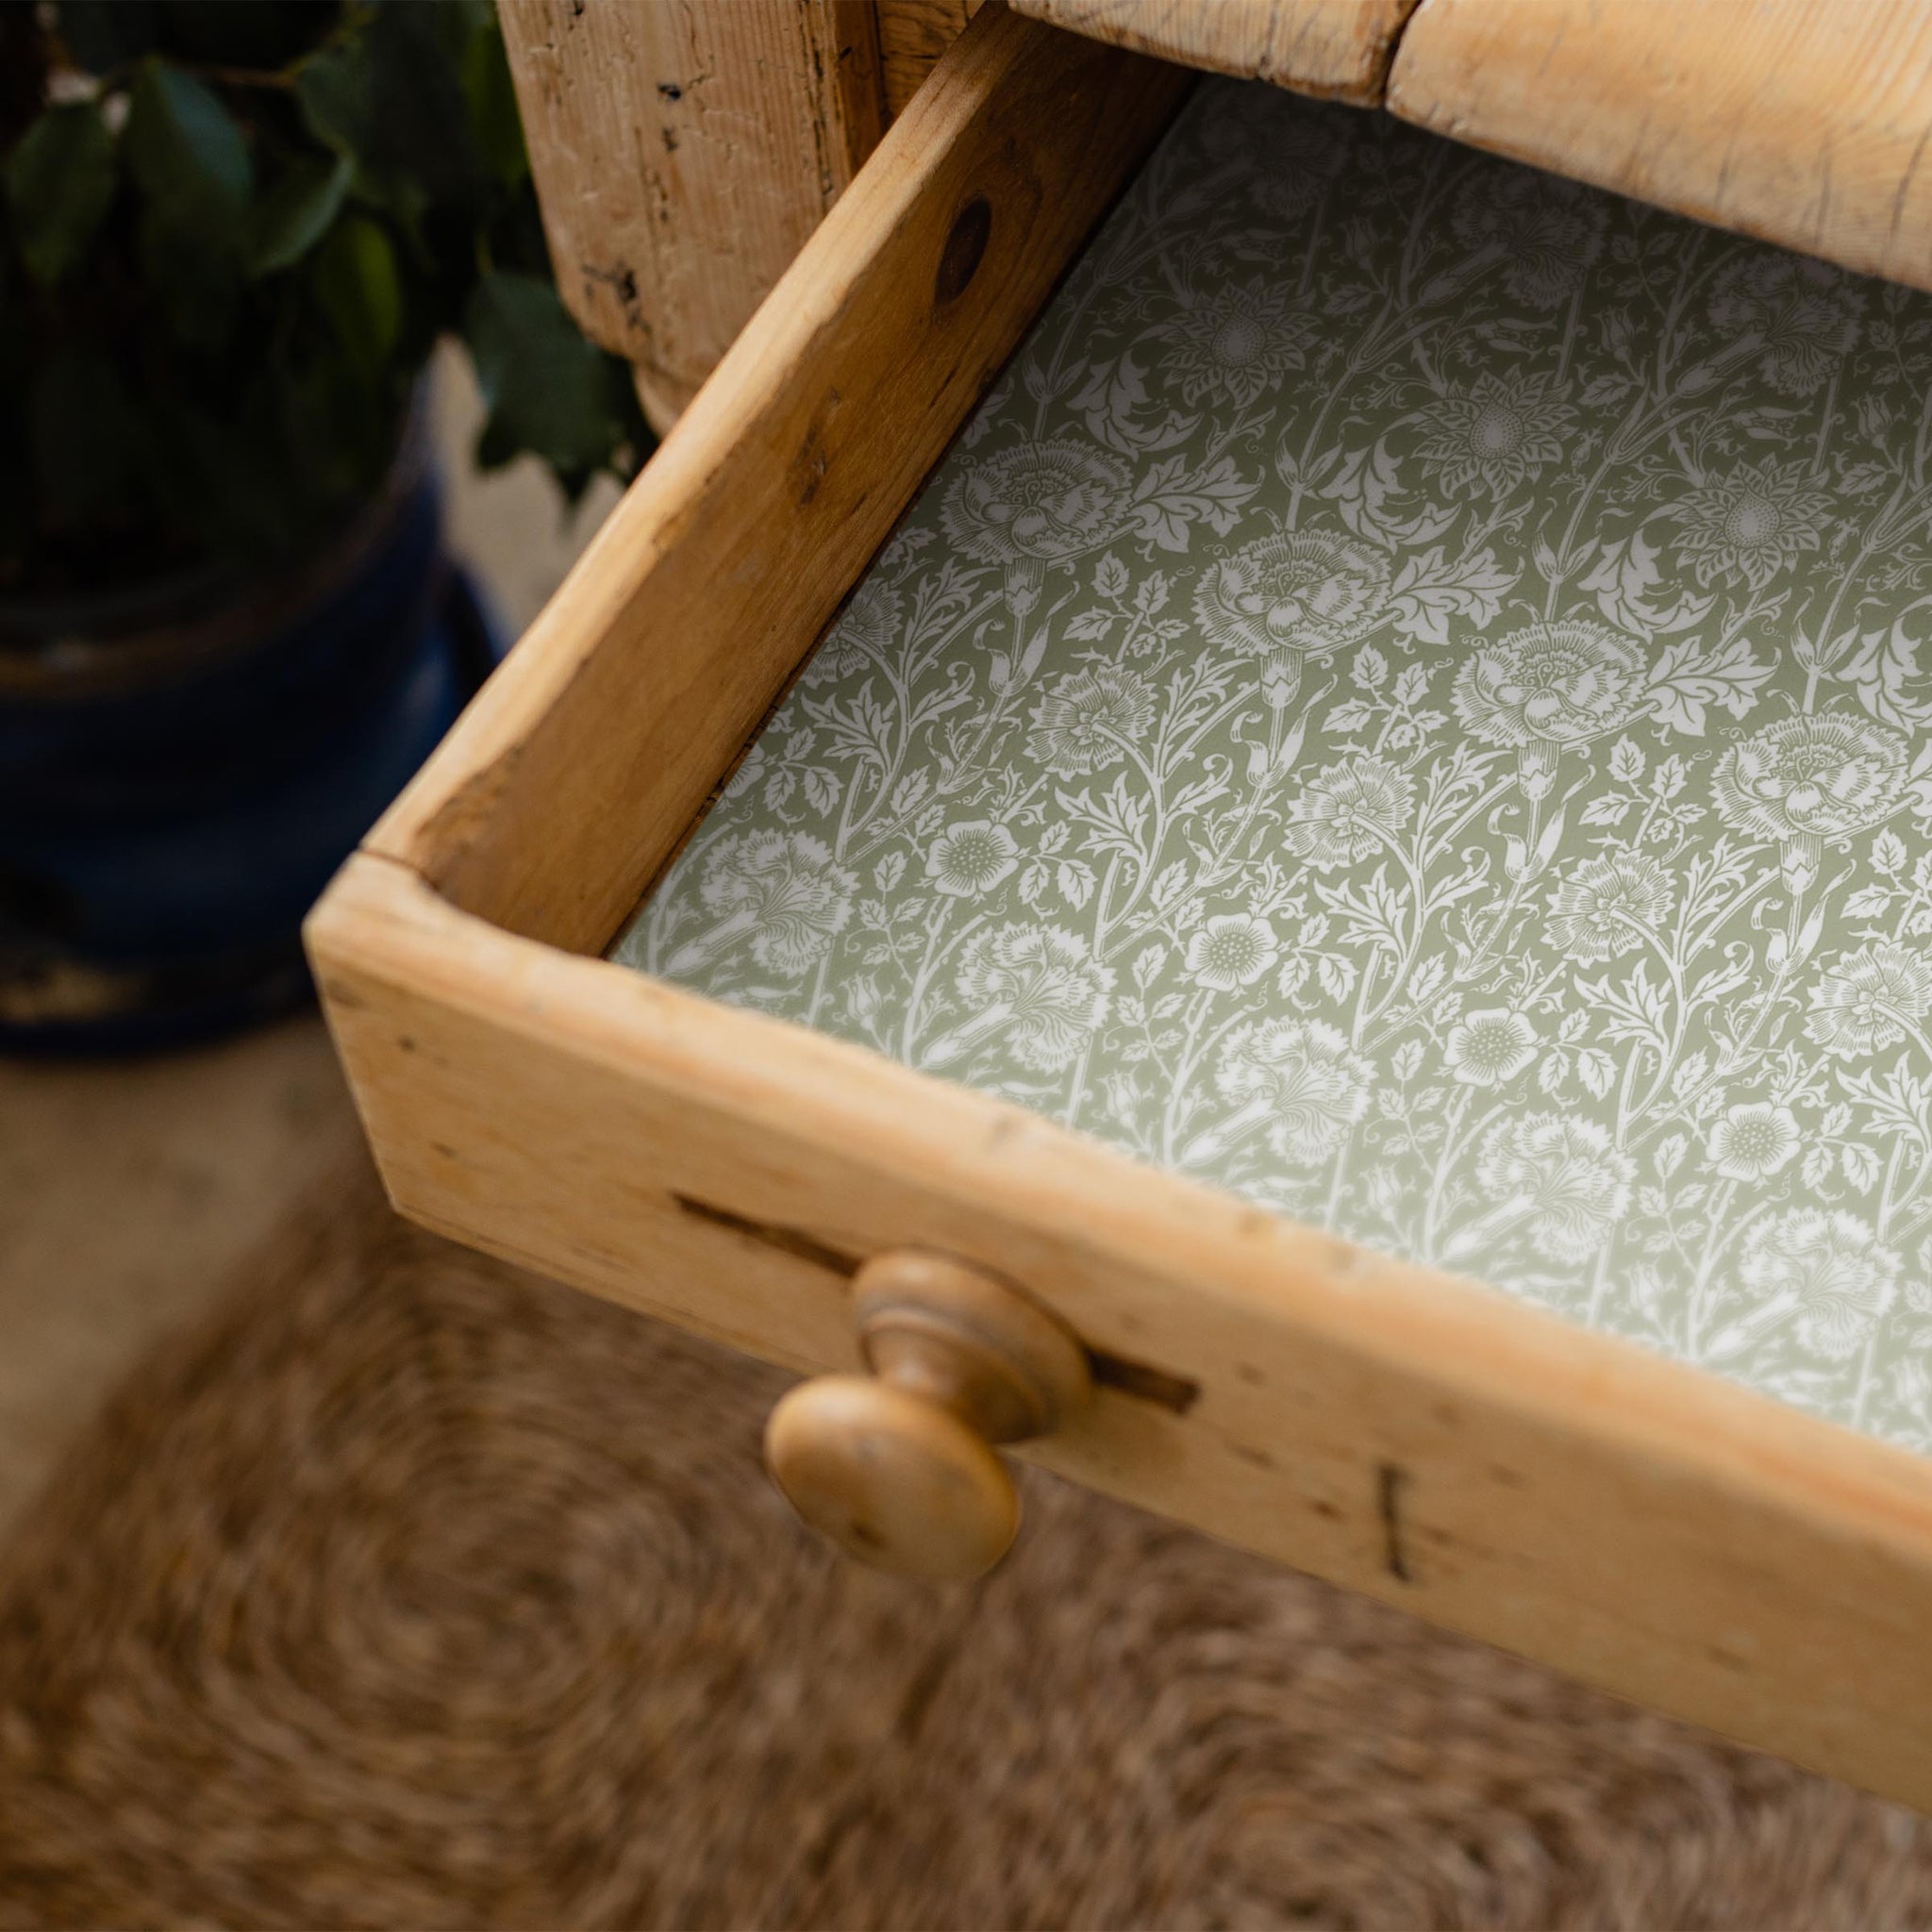 FRESH LINEN SCENTED Drawer Liners in SAGE GREEN William Morris Design